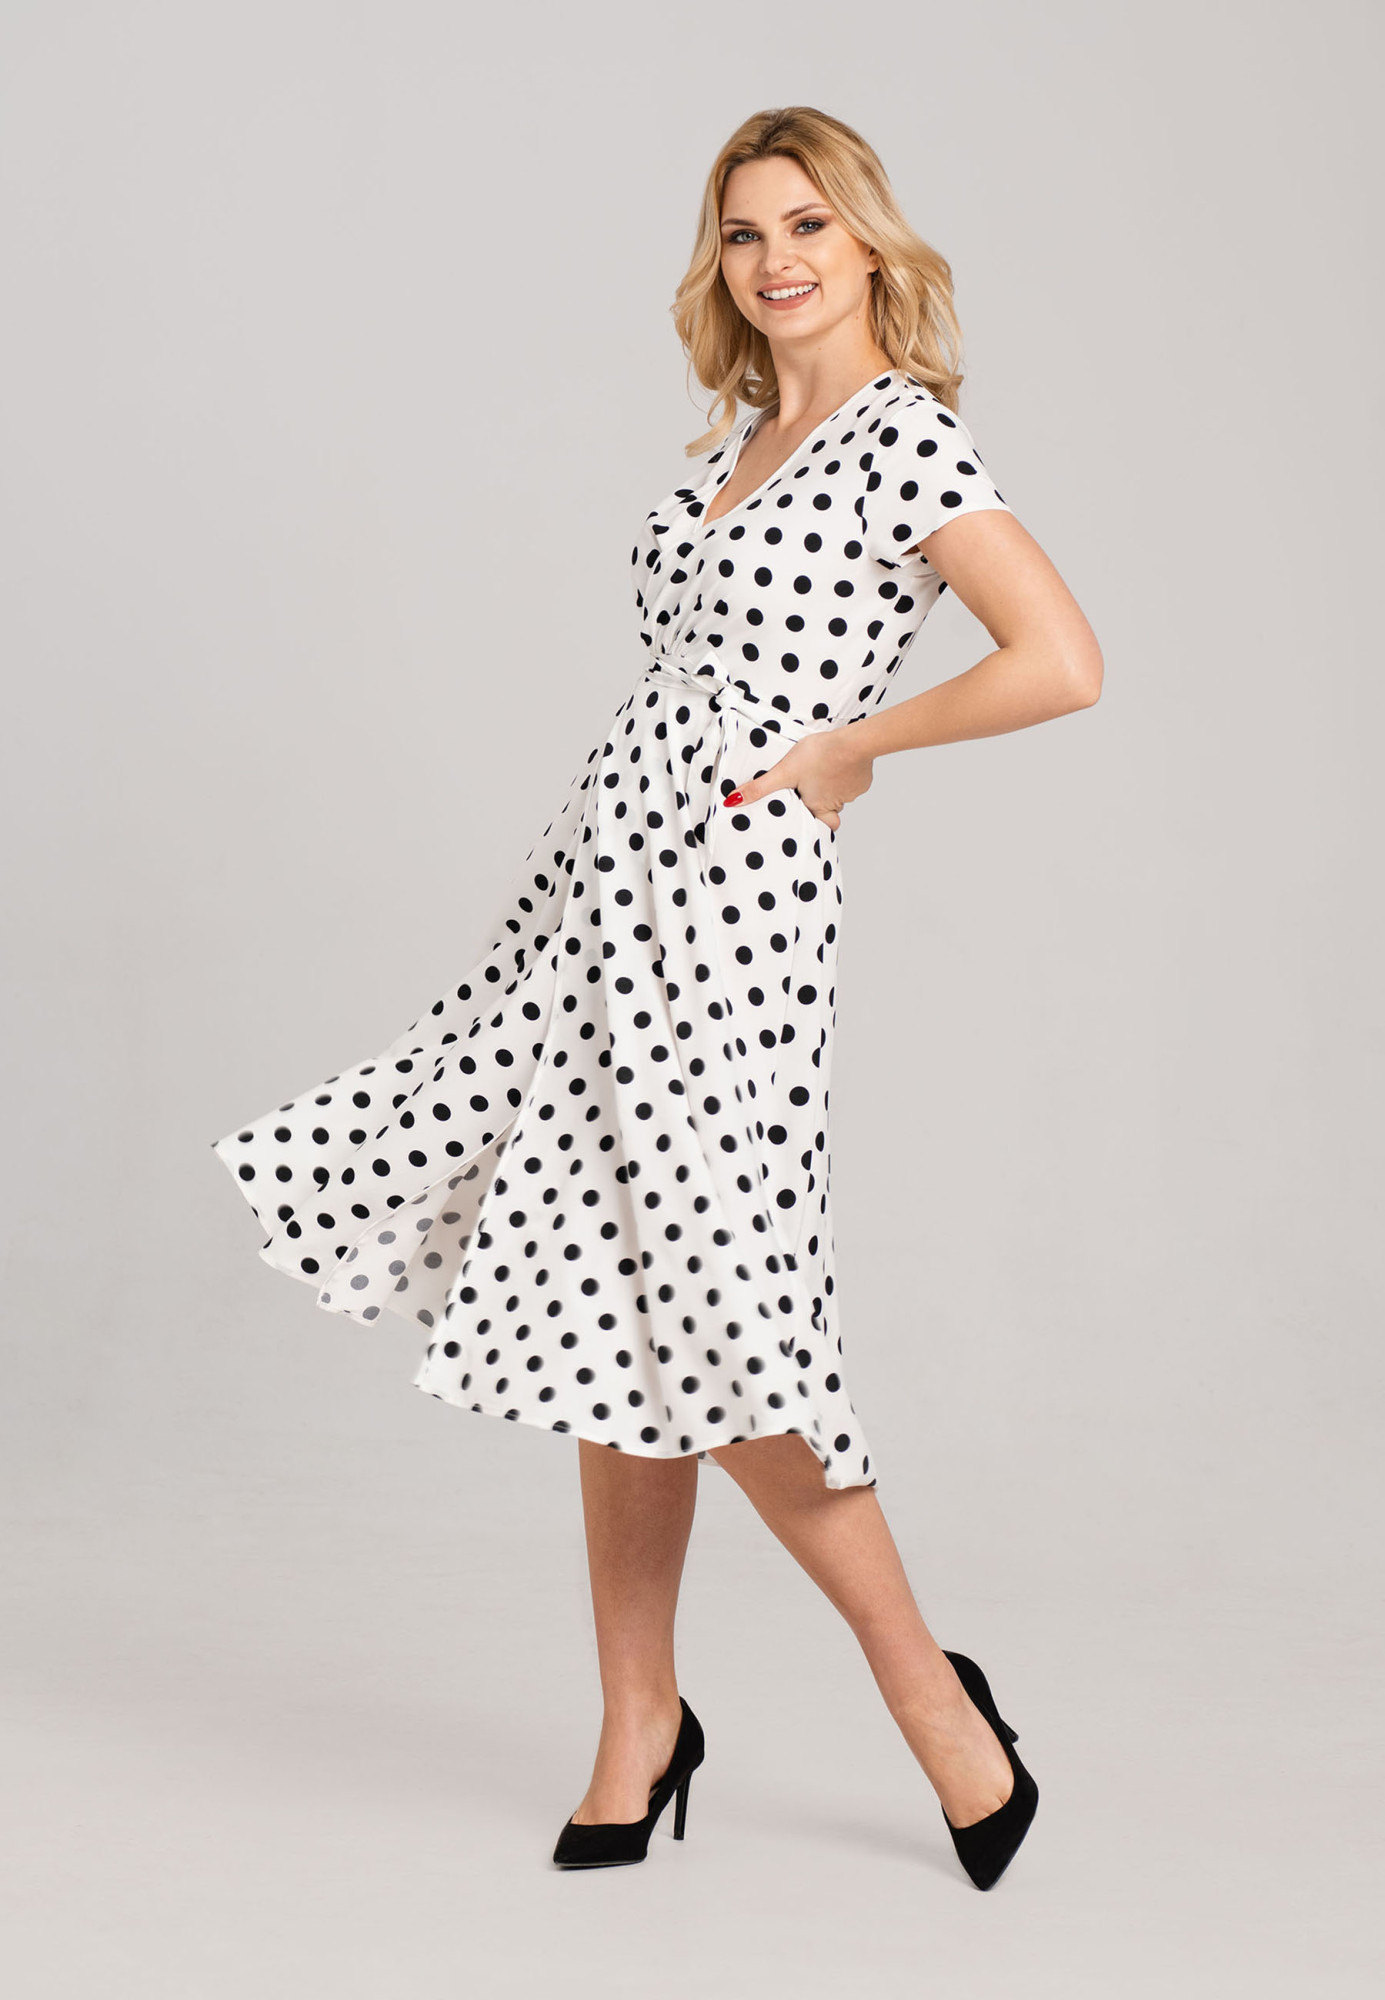 Look Made With Love Šaty N20 Polka Dots Black/White XL